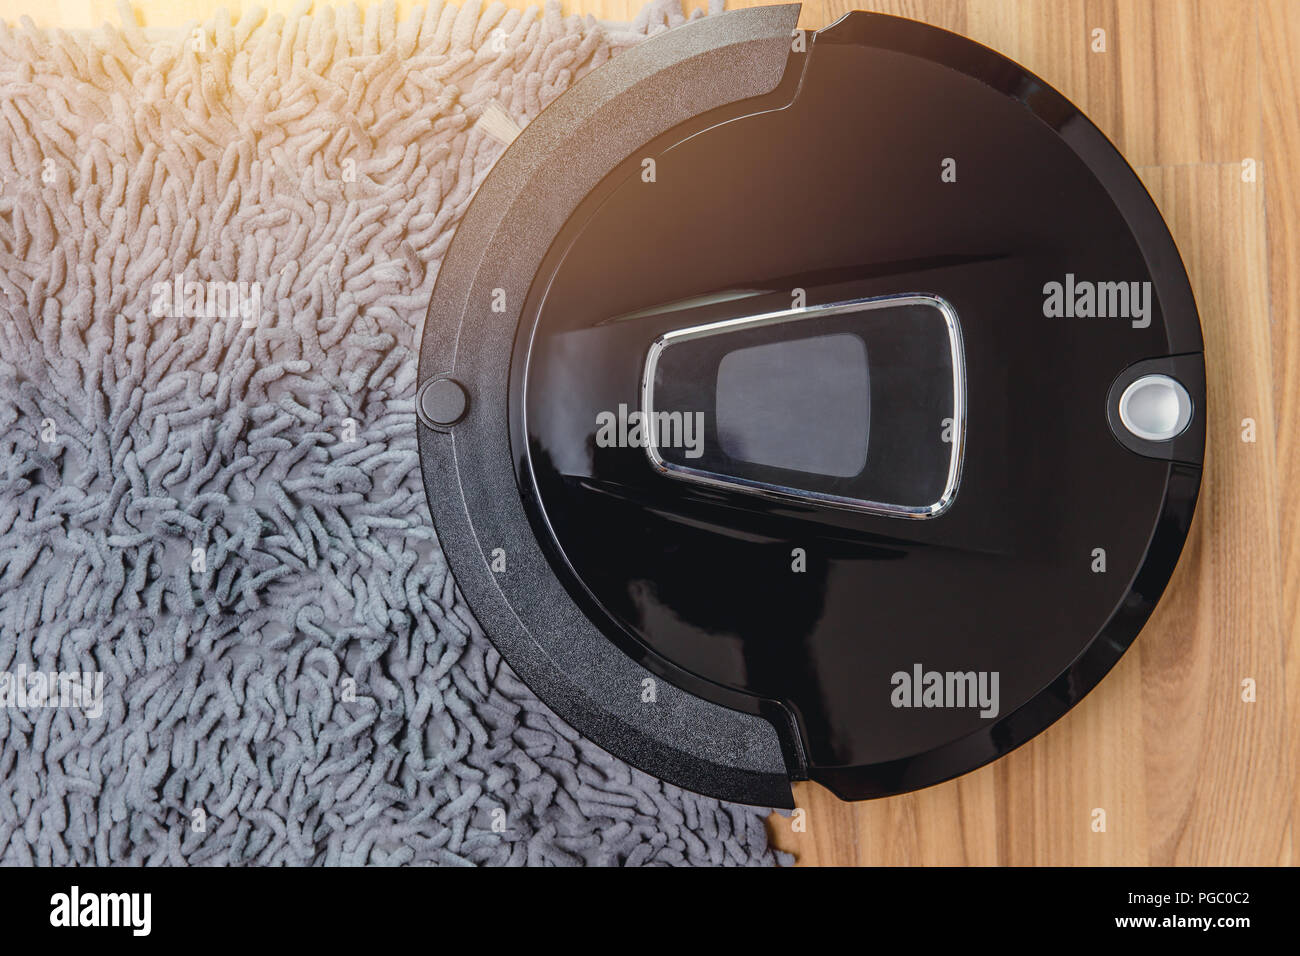 Automate Robot vacuum cleaner on laminate wood floor with carpet cleaning machine. Stock Photo